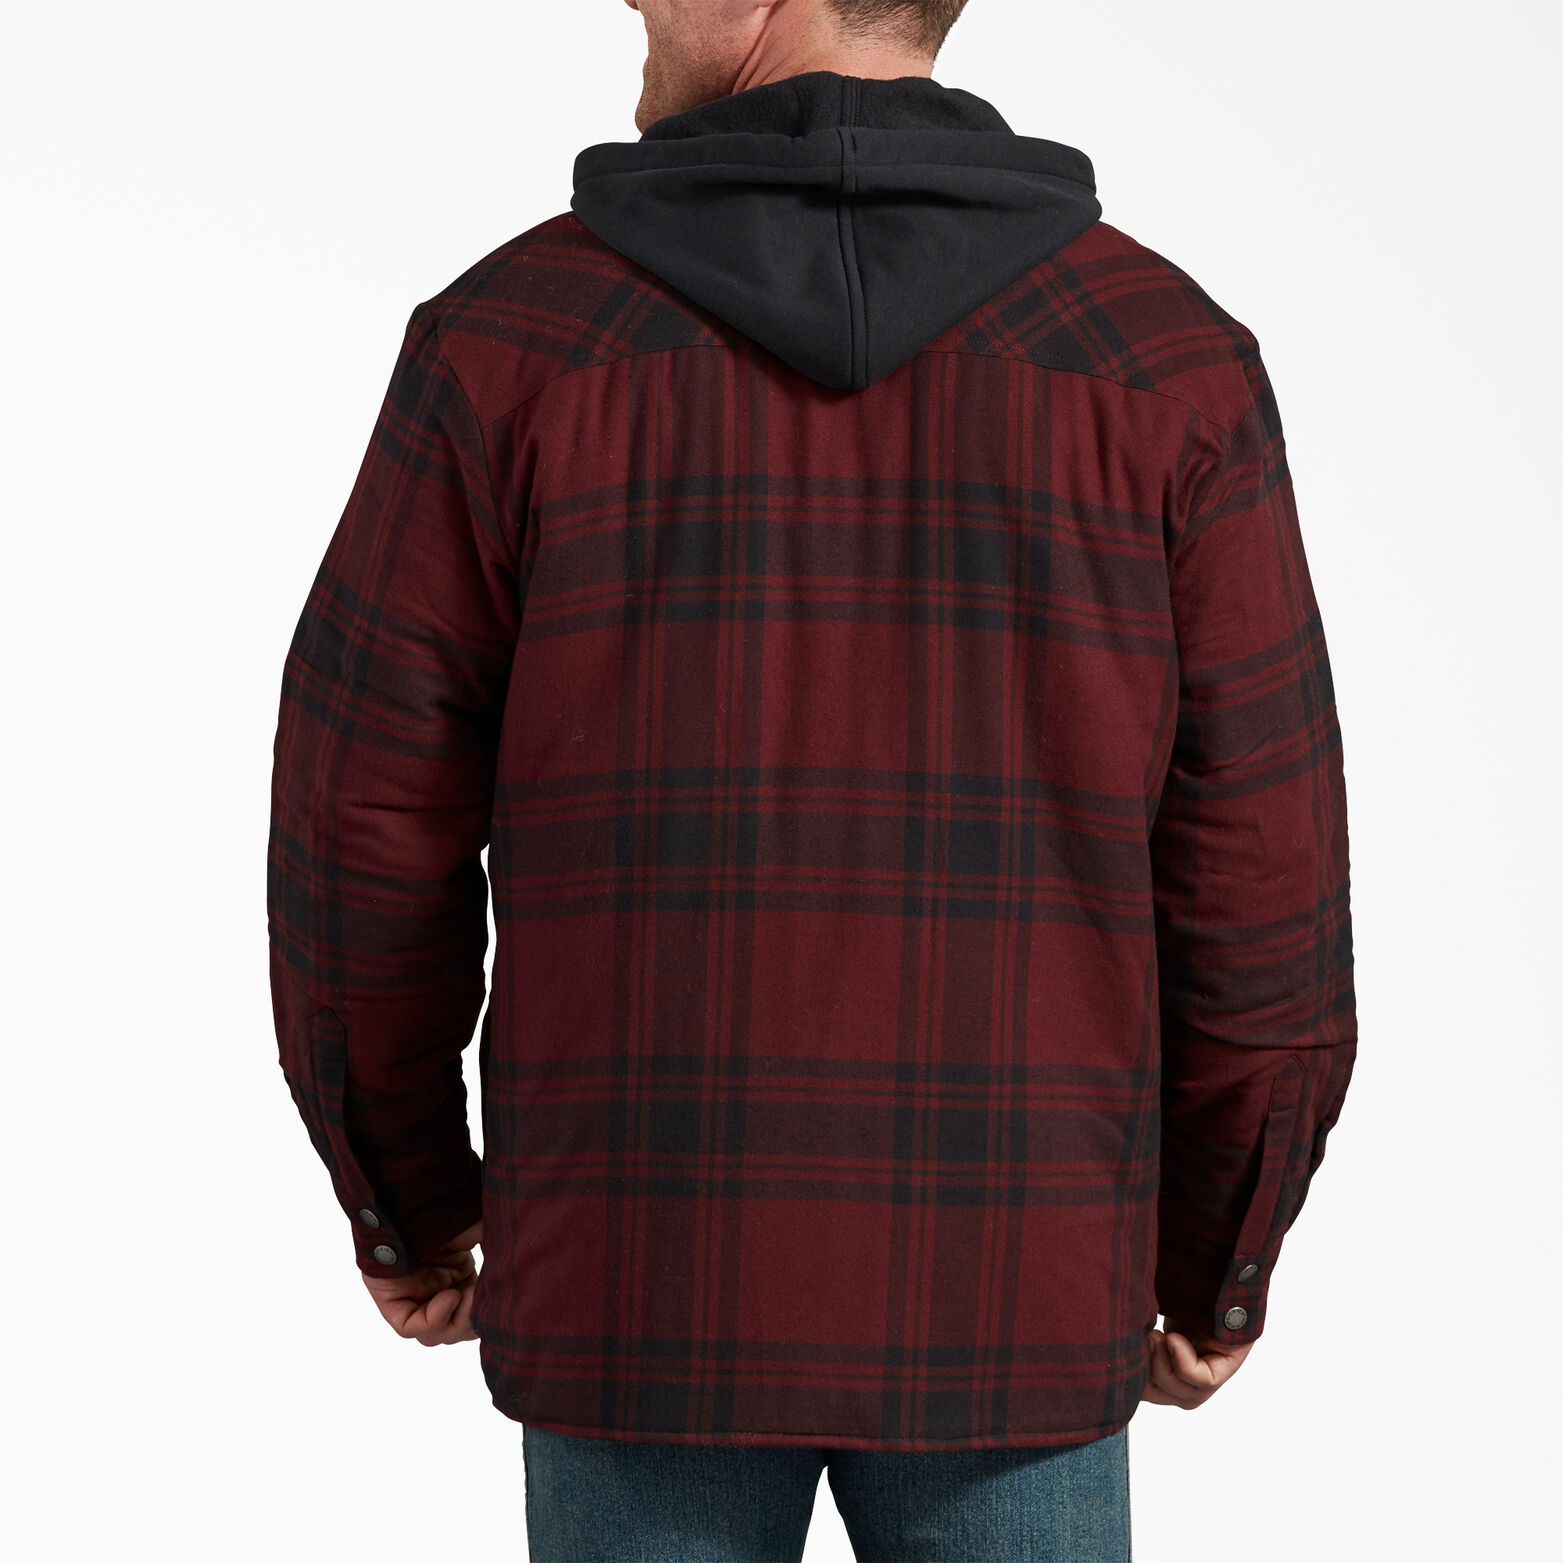 Relaxed Fit Icon Hooded Quilted Shirt Jacket , Dark Port Black Plaid ...